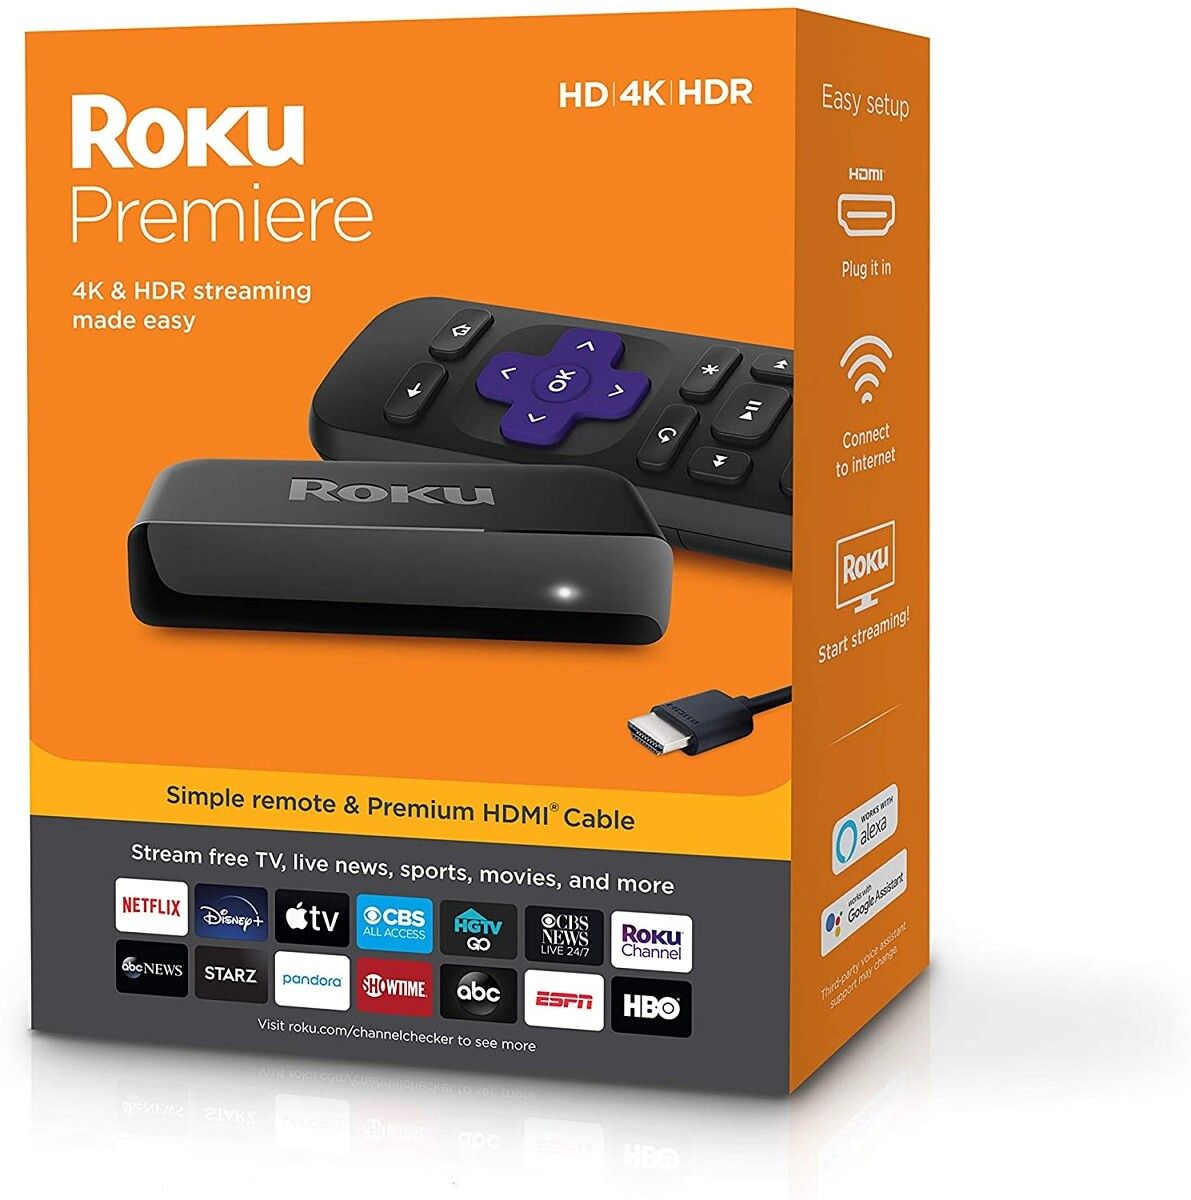 Roku Premiere is the simple way to start streaming in HD, 4K, and HDR picture quality.